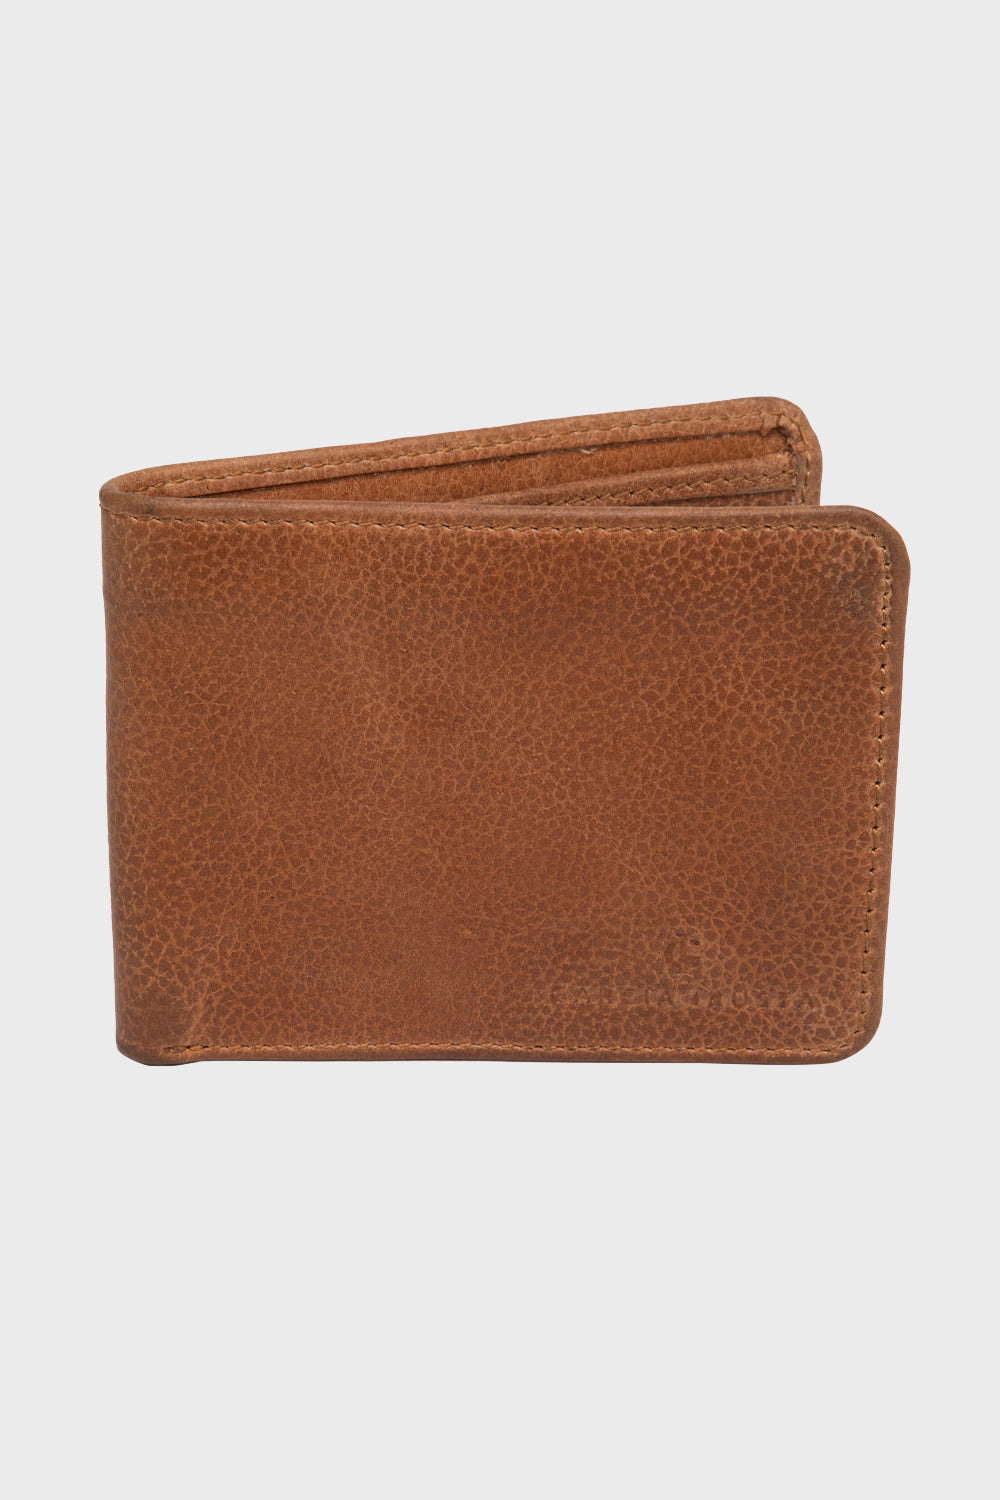 Justanned Genuine Leather Wallet